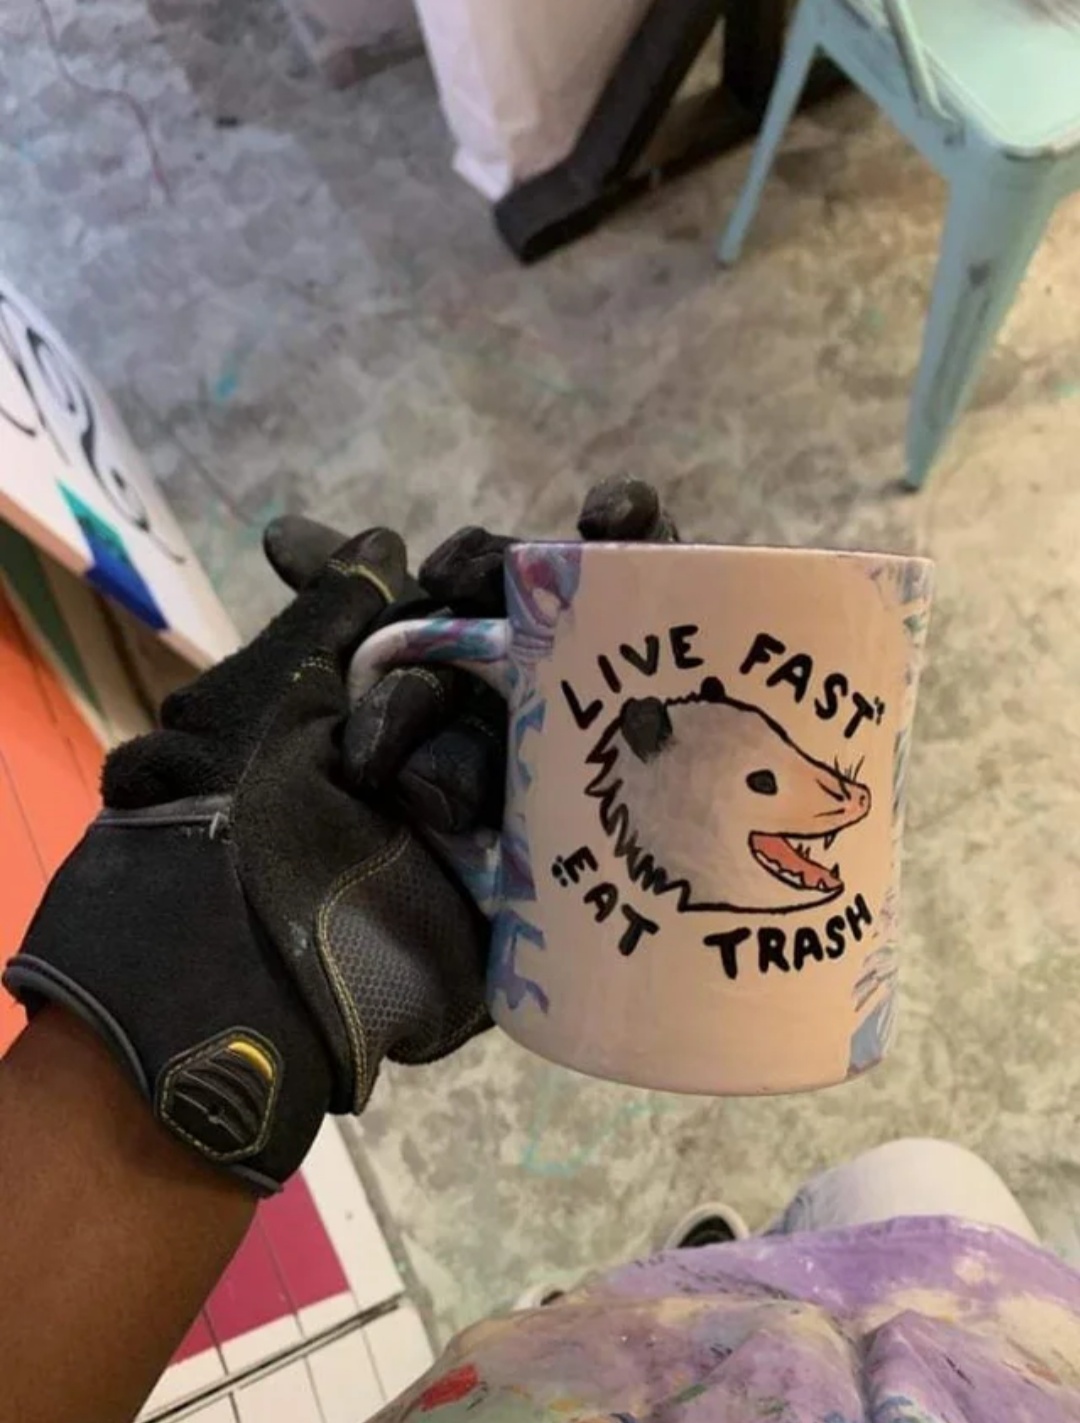 Live fast - eat trash - Garbage, A cup, Humor, Truth, Opossum